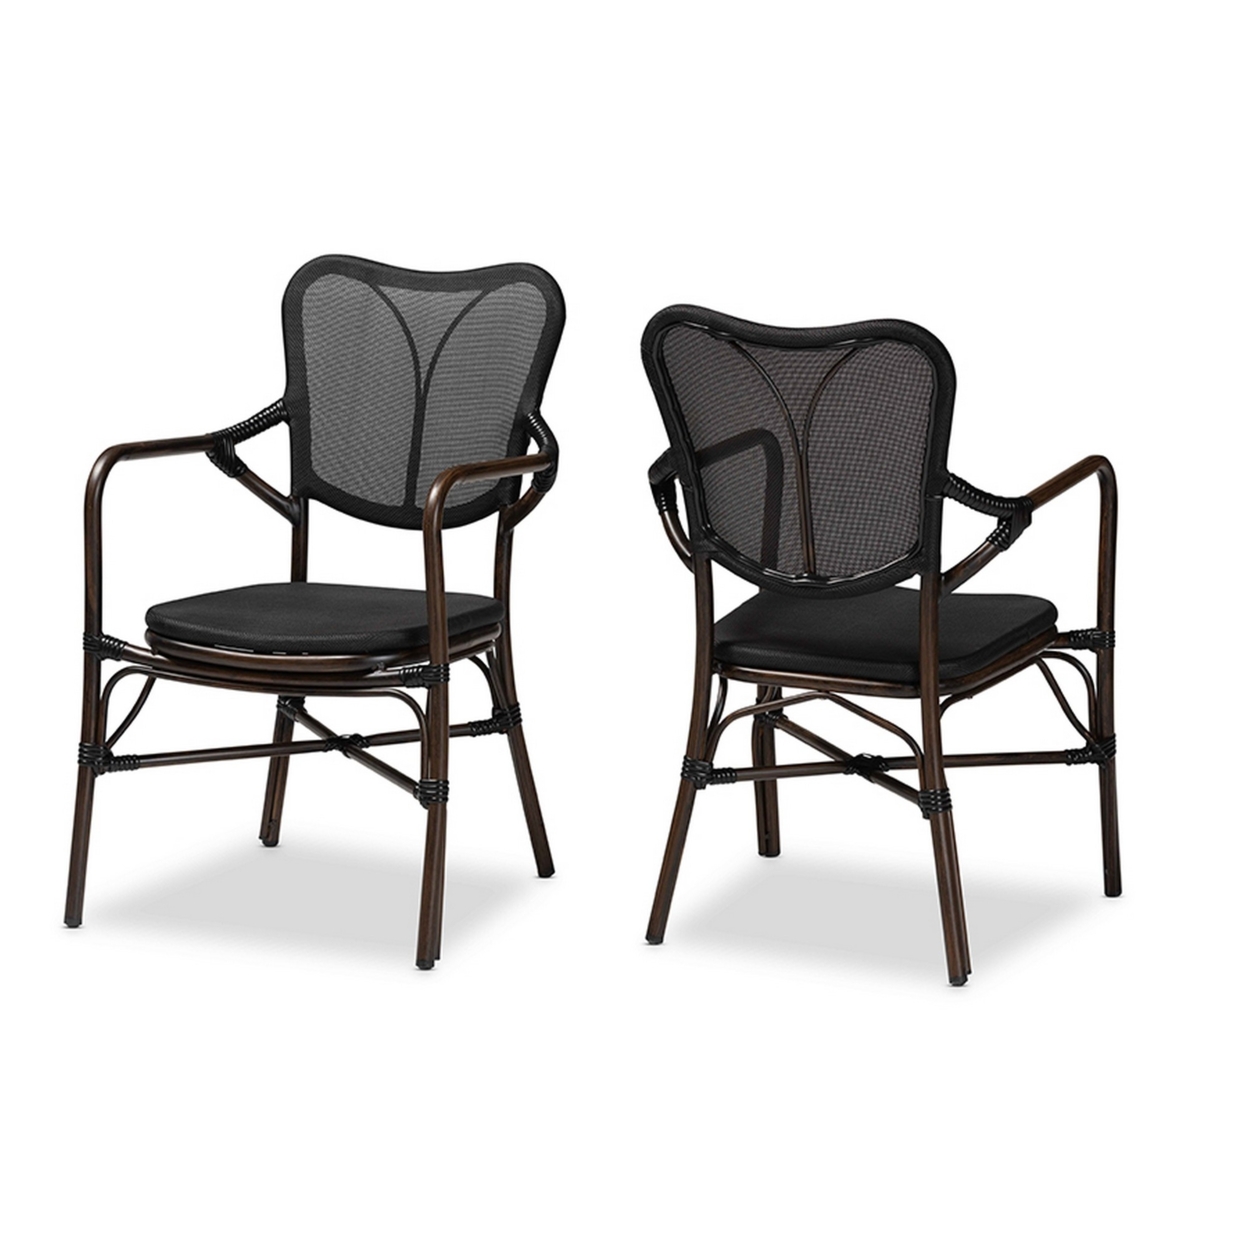 Baxton Studio Erling Mid-Century Modern Black and Dark Brown Finished Metal 2-Piece Outdoor Dining Chair Set